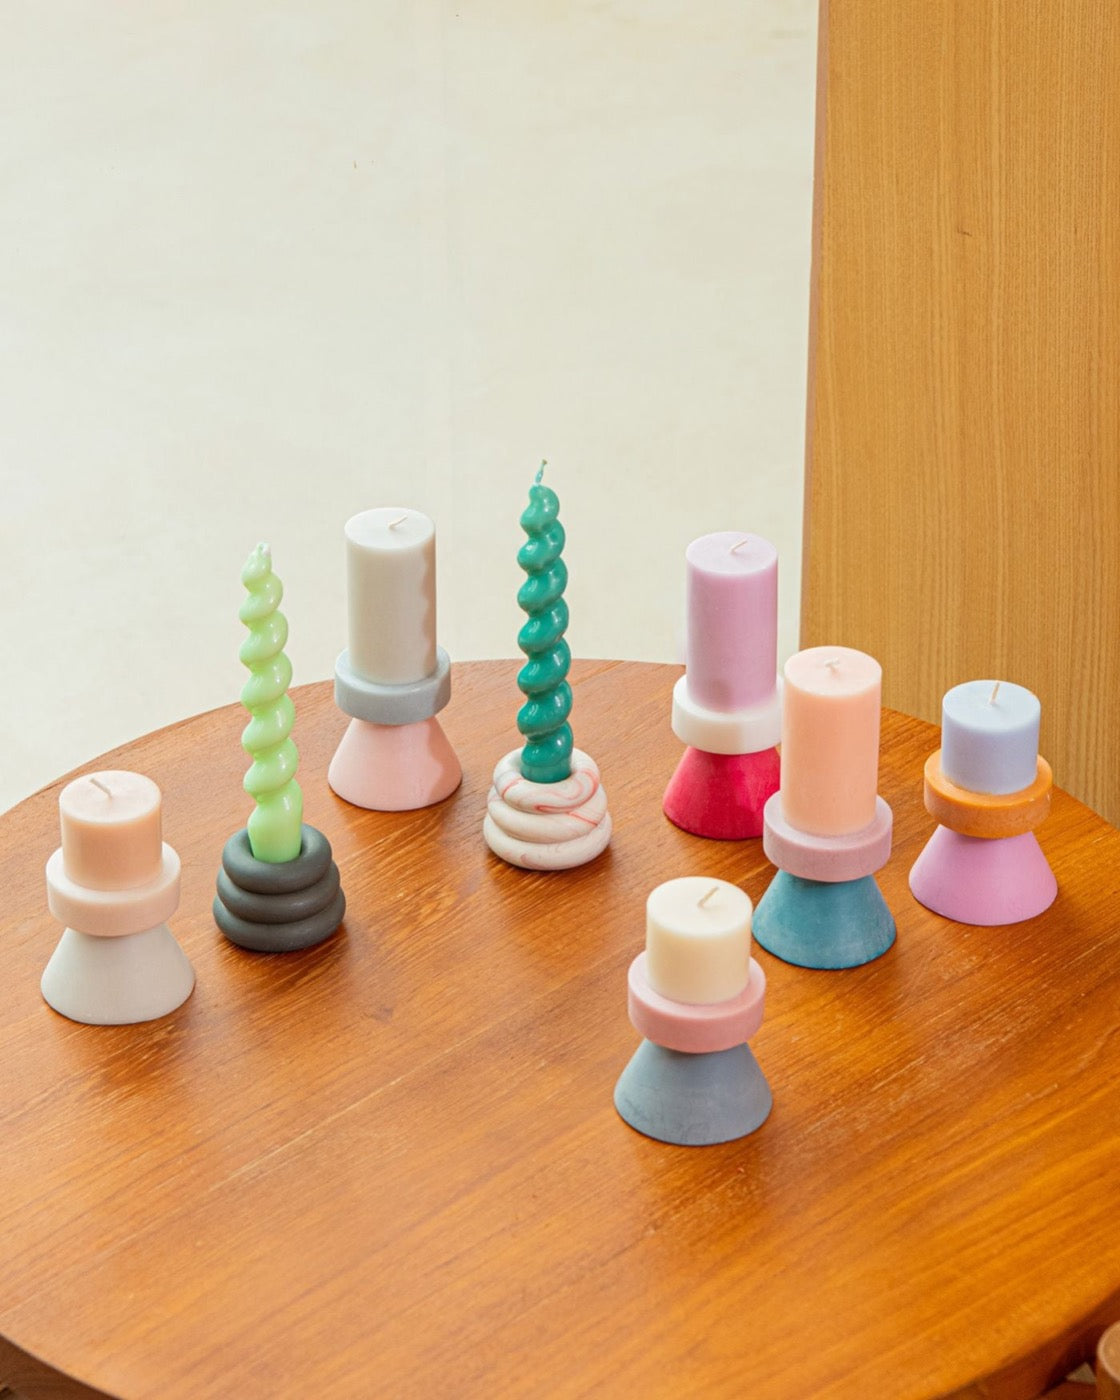 Stack Candle mini by Yod and co in pink, cream and grey